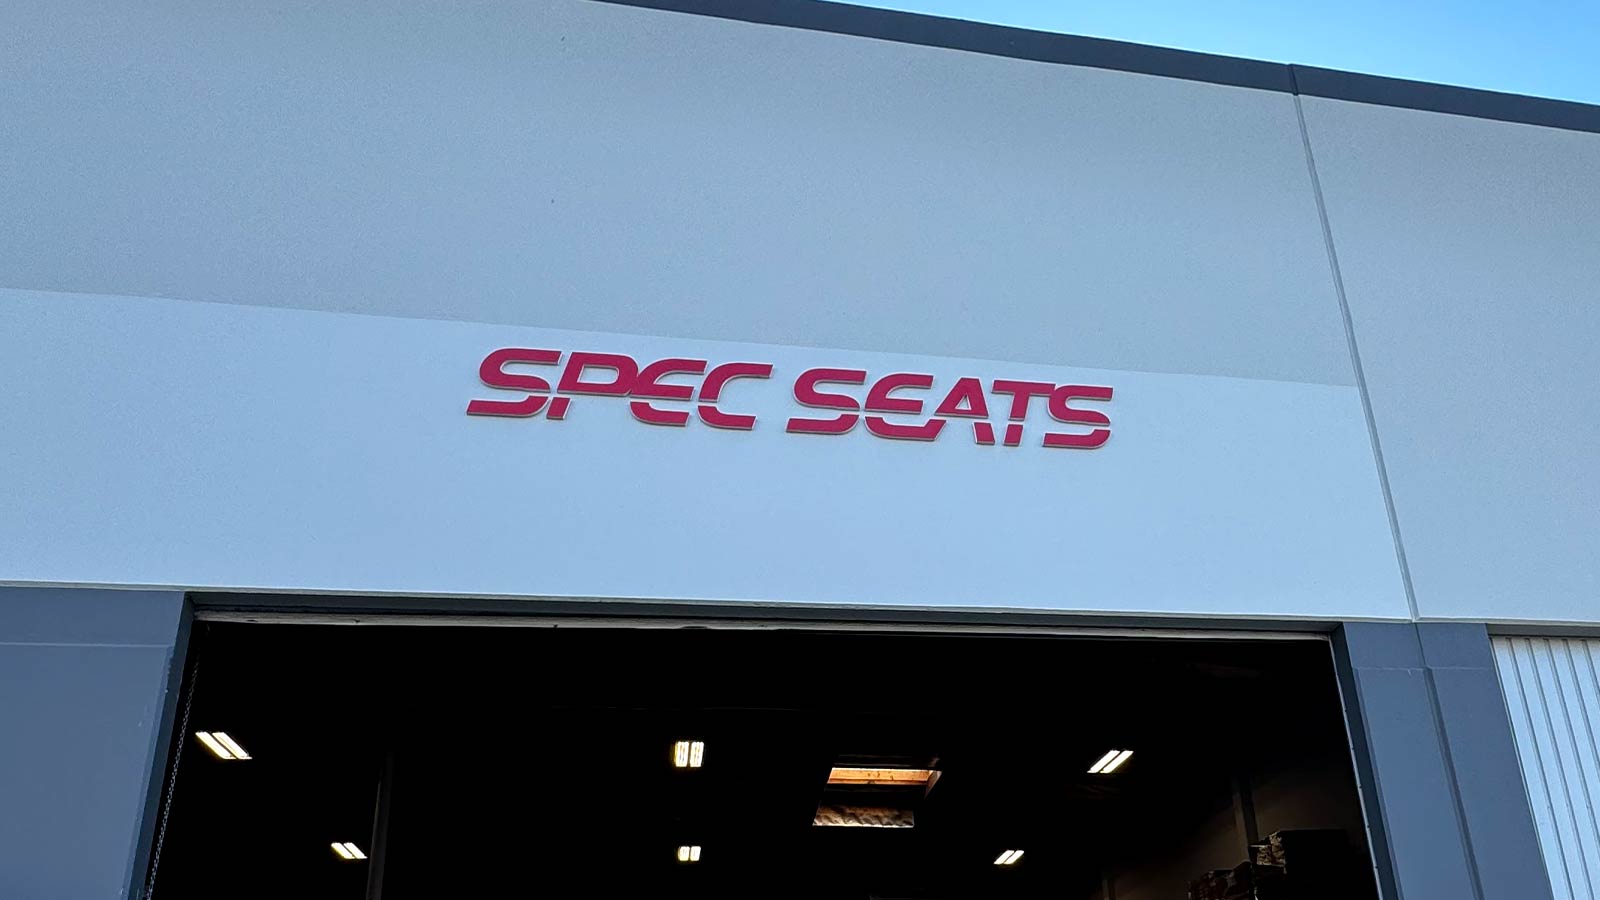 spec seats custom letter sign mounted on the facade